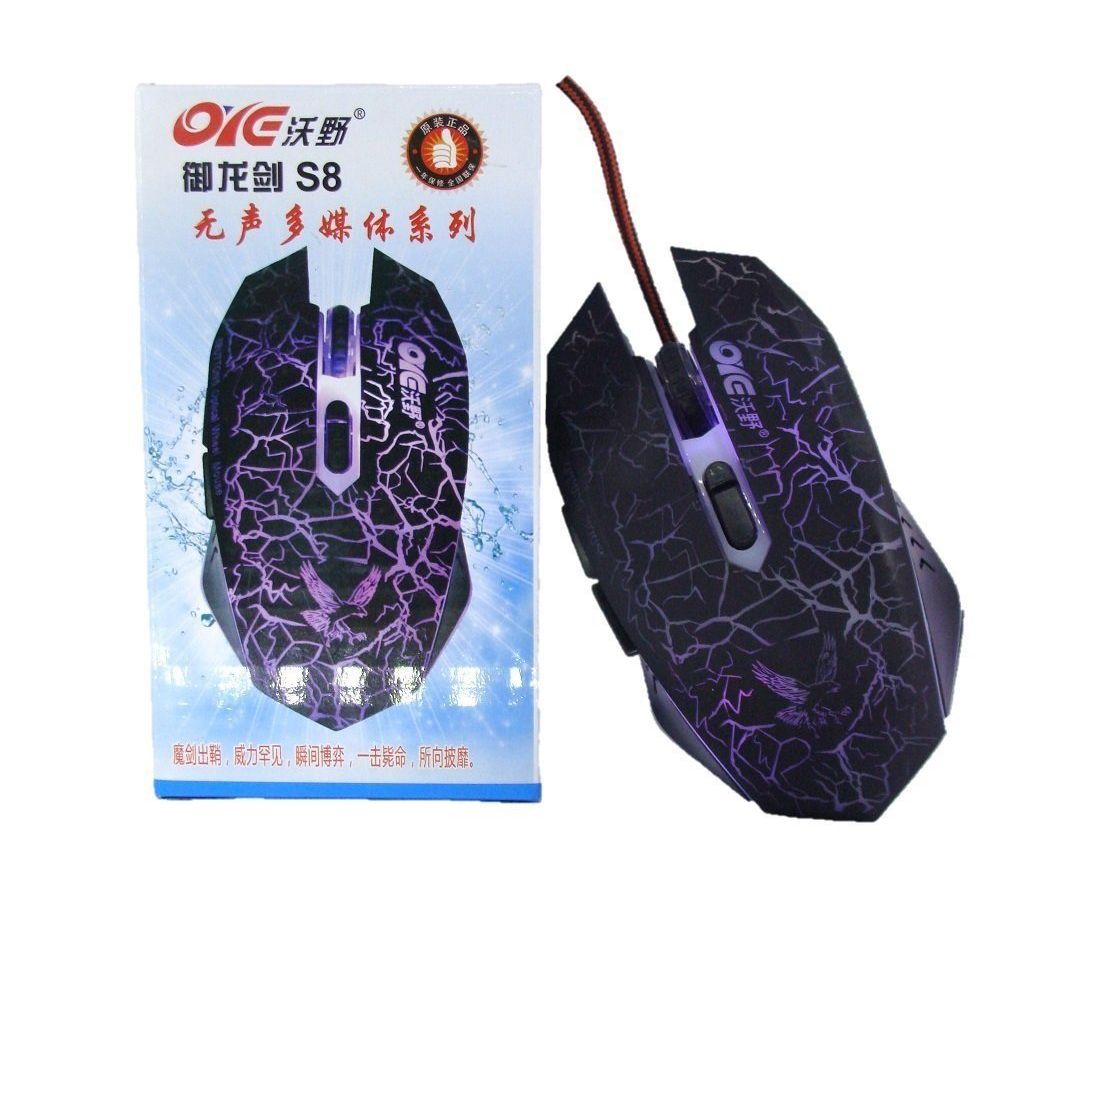 MOUSE GAMING RGB OYE V8/S8 800-2400 DPI MULTE COLOR BRAIDED WIRE USB, Mouse